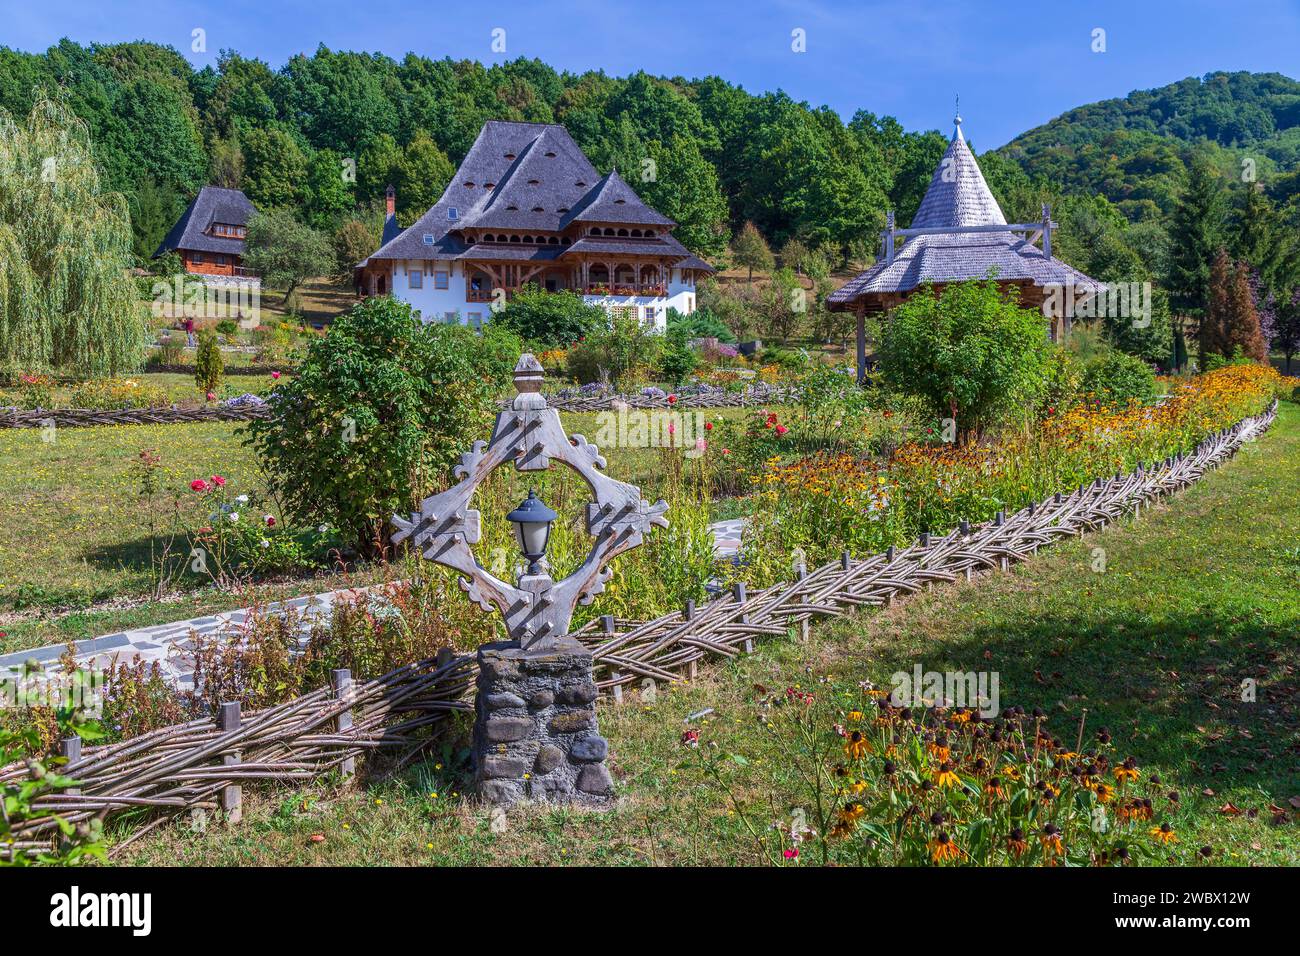 Buildings in the Barsana monastic complex, Maramures, Romania. The first wooden church was built in 1711 and the Orthodox Barsana Monastery is include Stock Photo